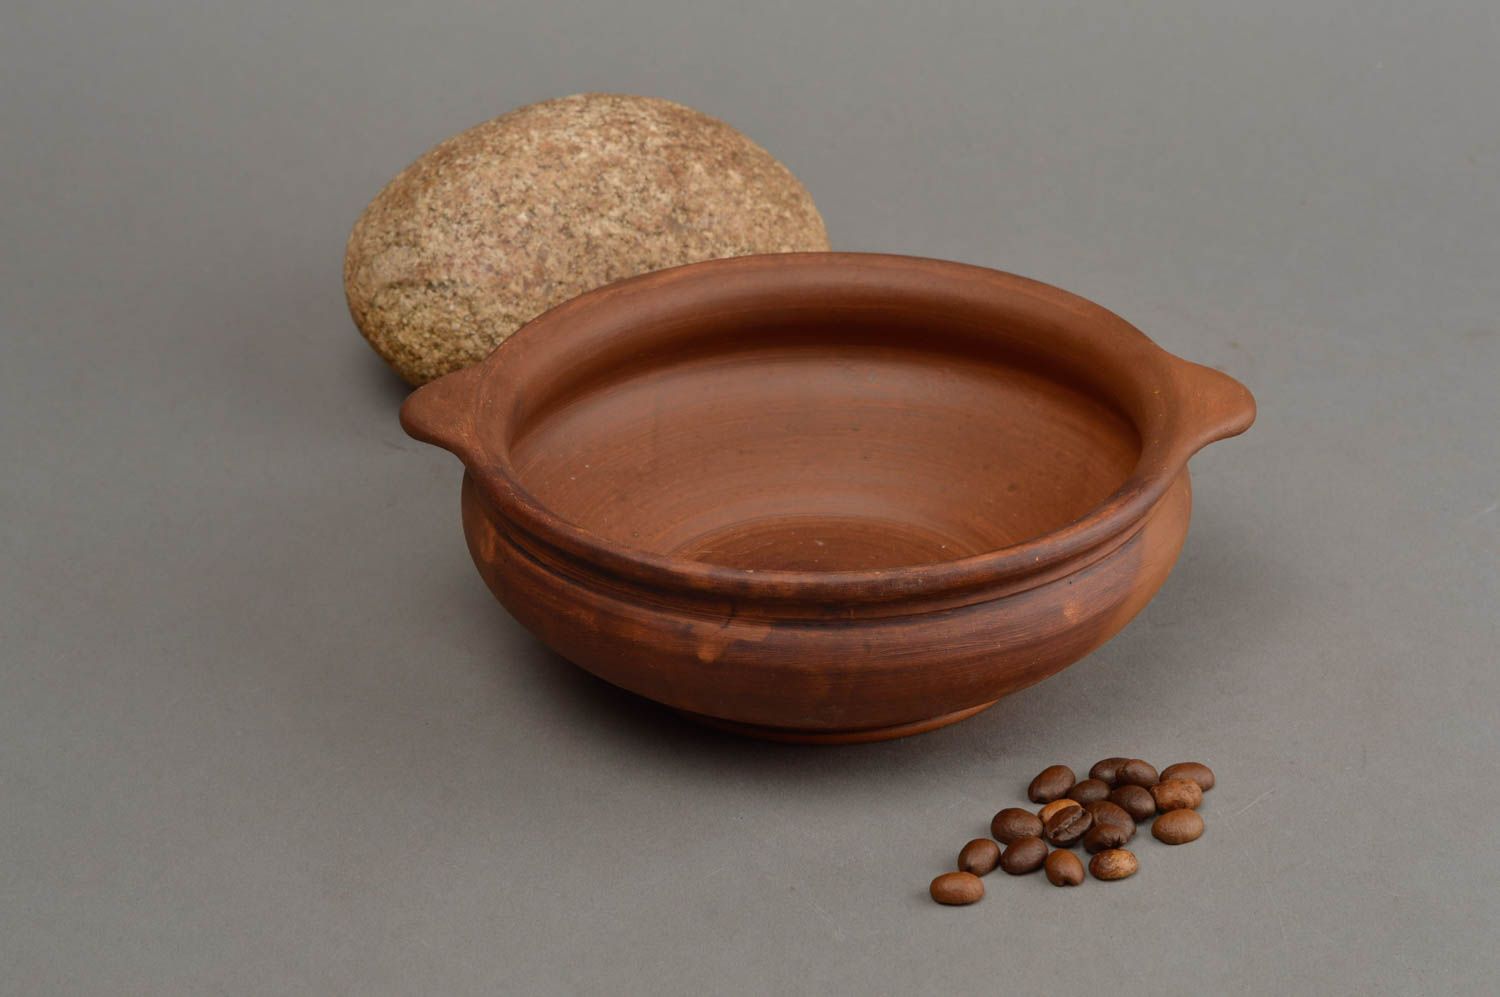 6 9 oz handmade terracotta cooking bowl with handles 0,84 lb photo 1